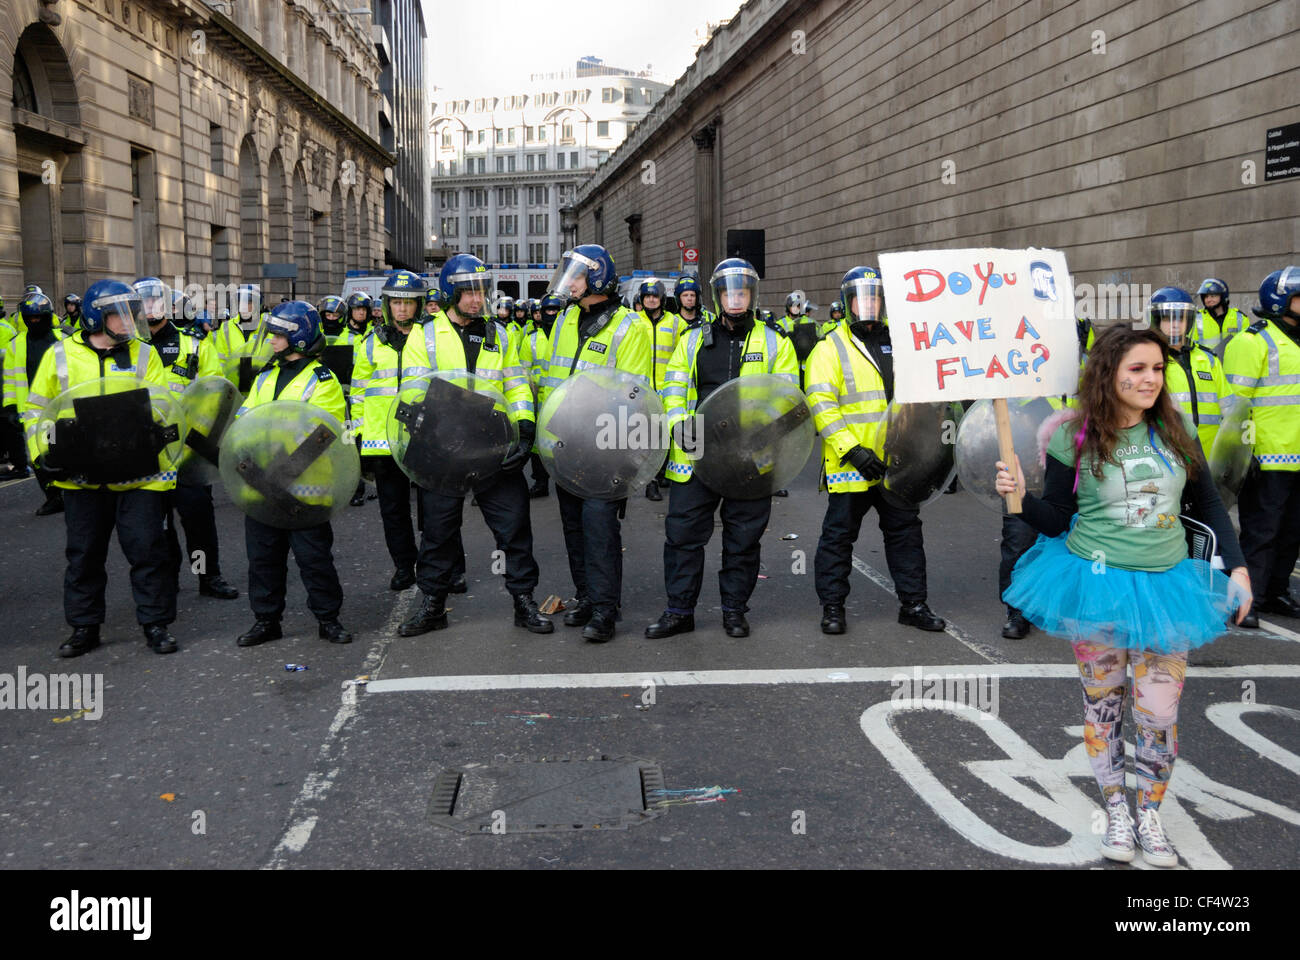 A young female protestor wearing a tutu and holding up a placard in front of a line of riot police during the G20 protests. Poli Stock Photo